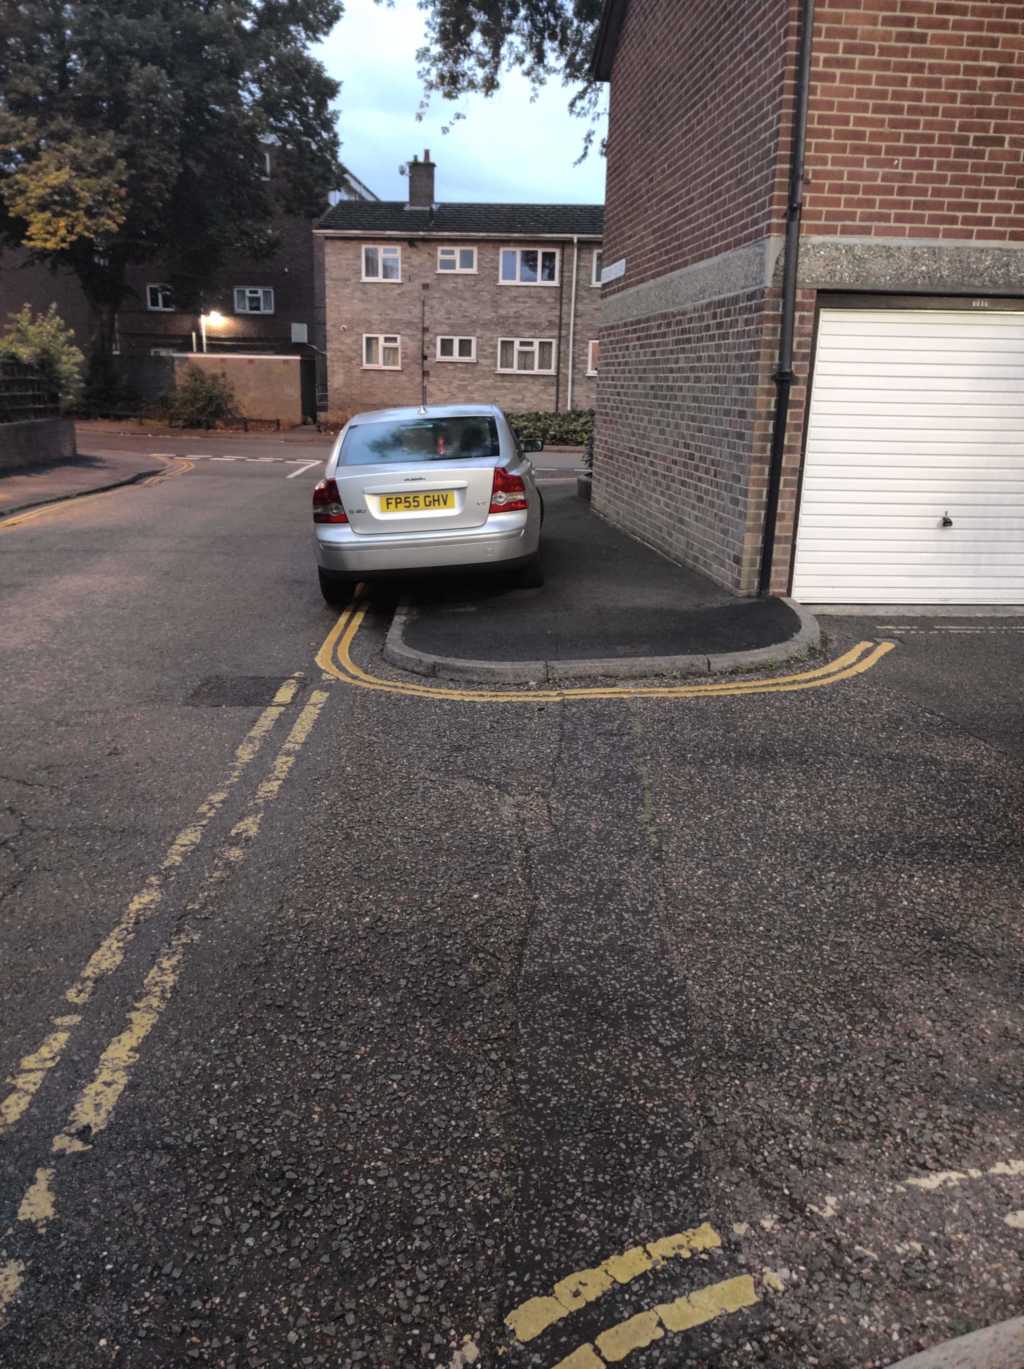 FP55 GHV displaying Inconsiderate Parking